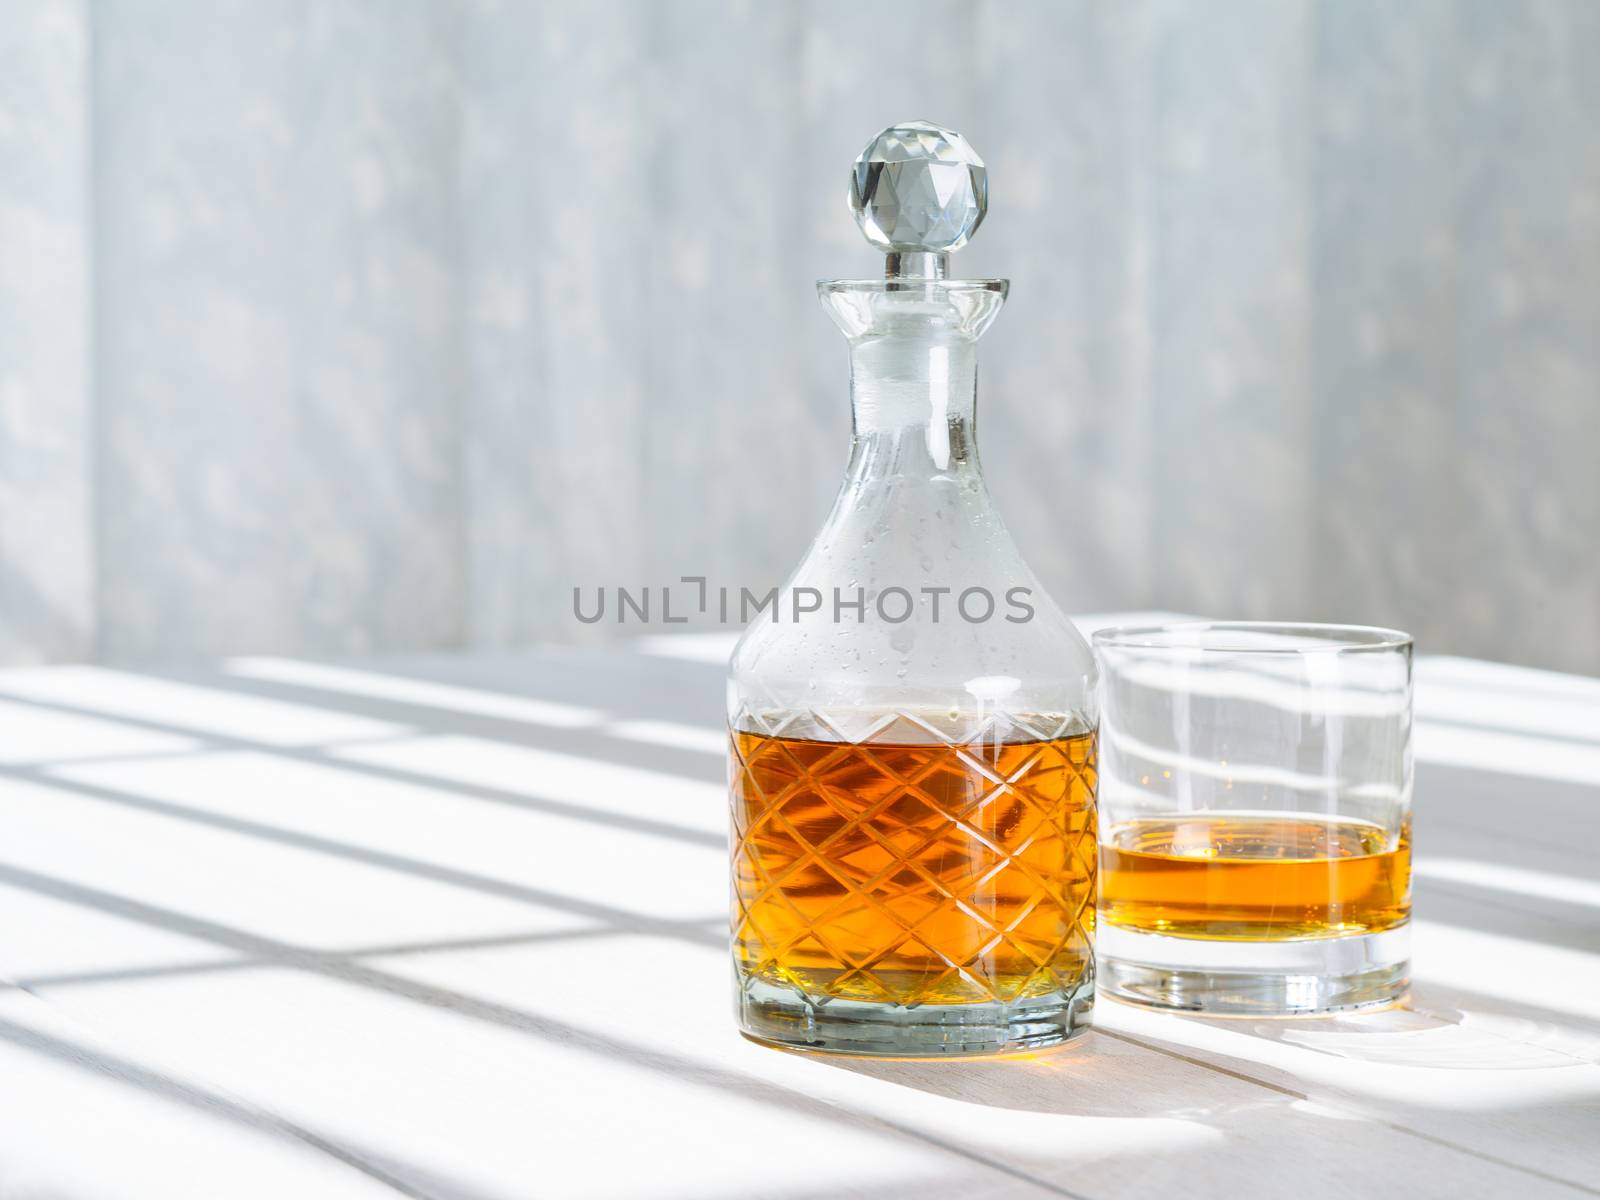 Whisky decanter and rocks glass by the window by sumners